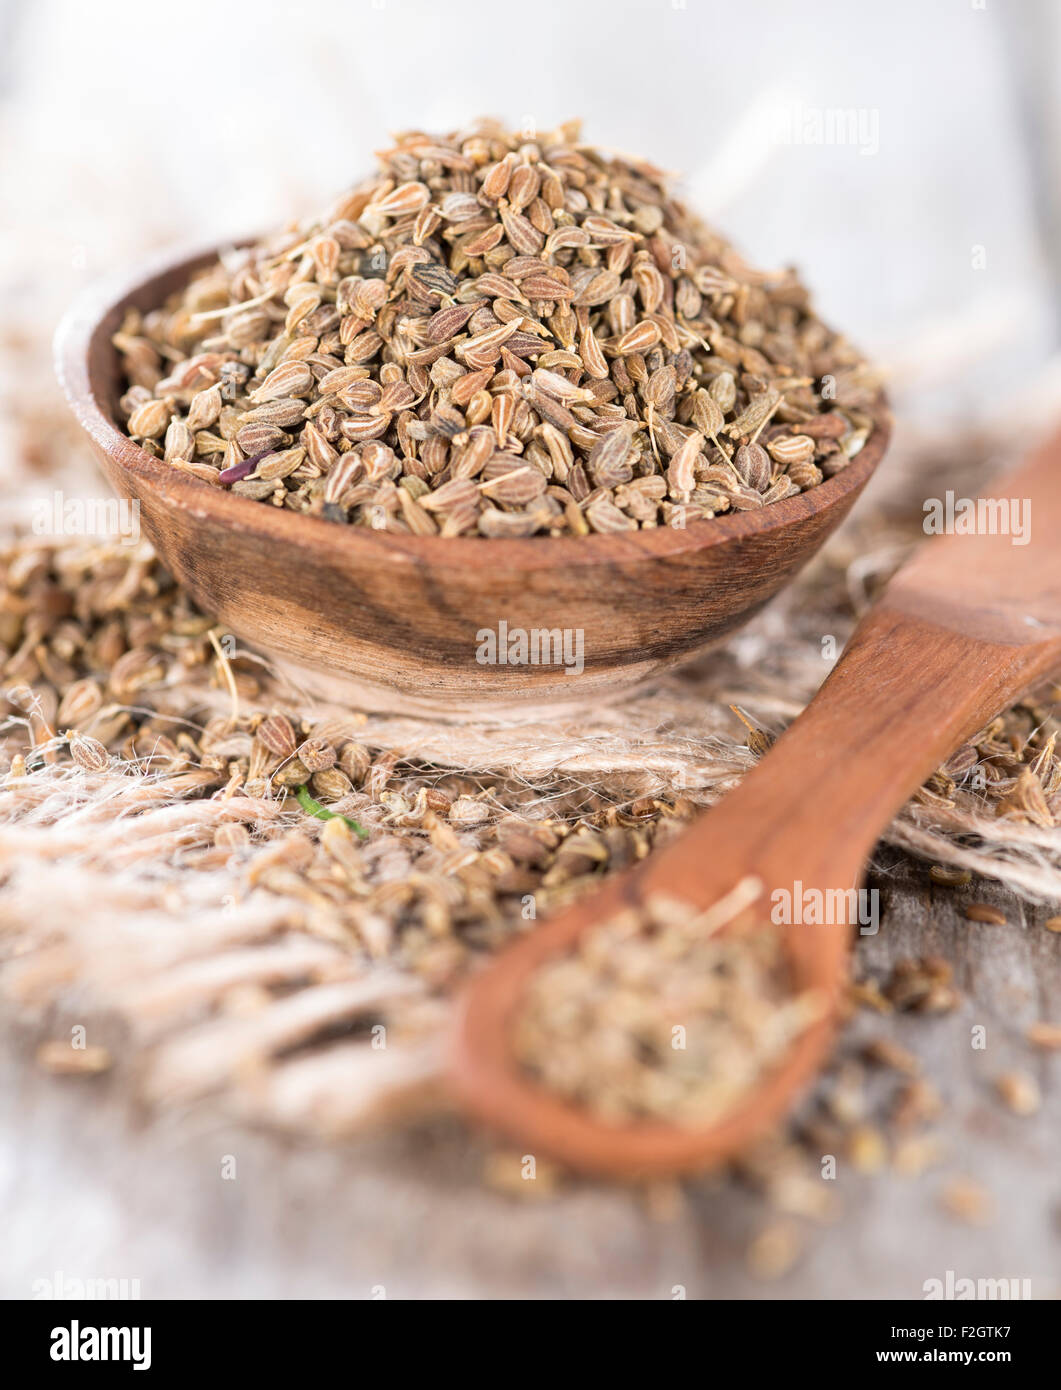 Portion of dried Anissed (detailed close-up shot) Stock Photo